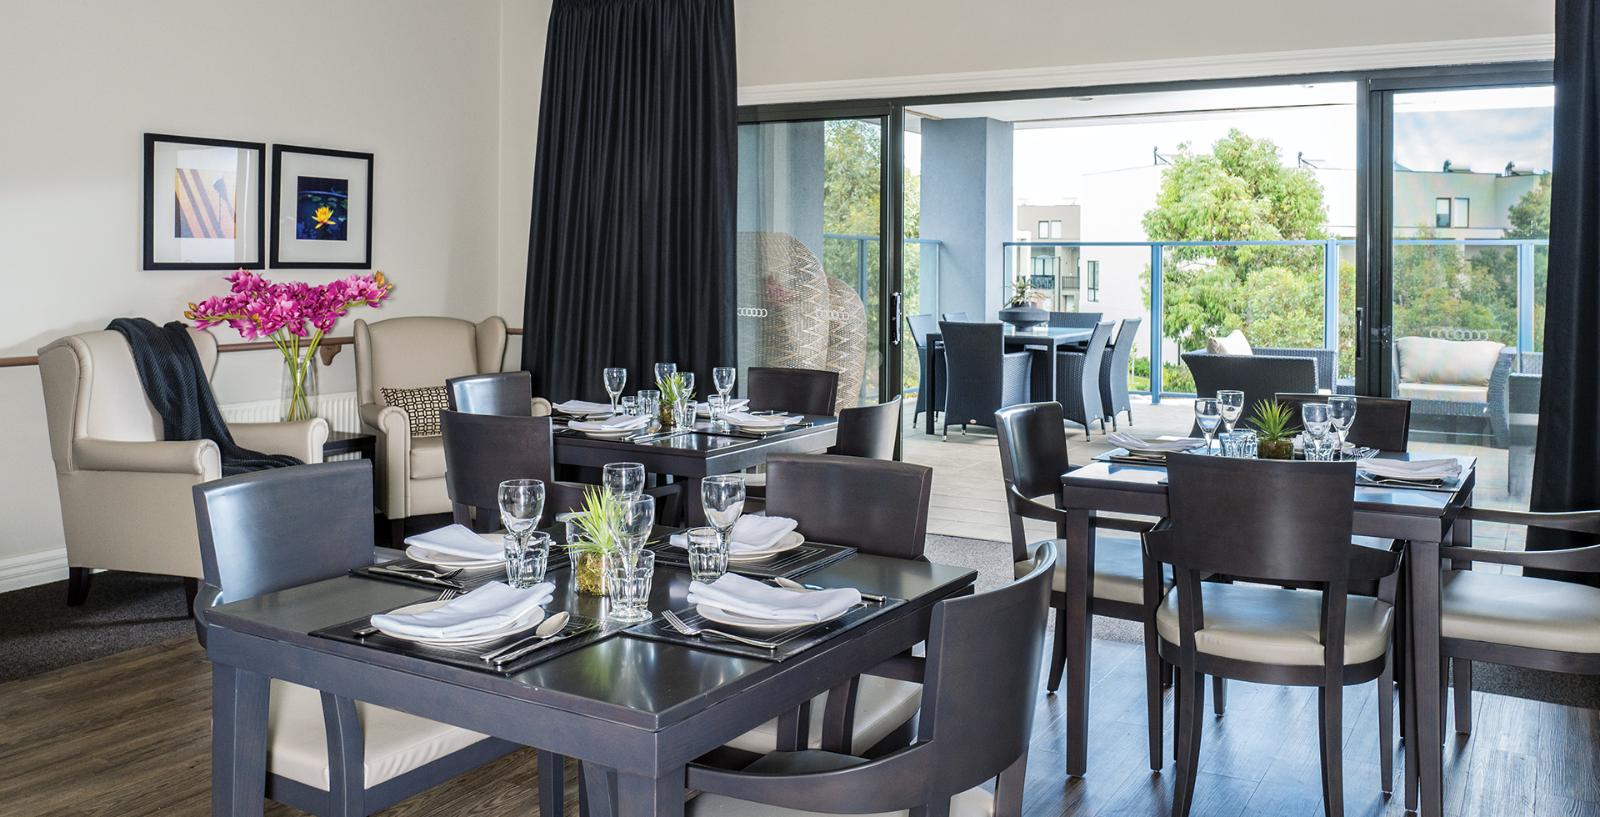 Arcare aged care maidstone dining room 05